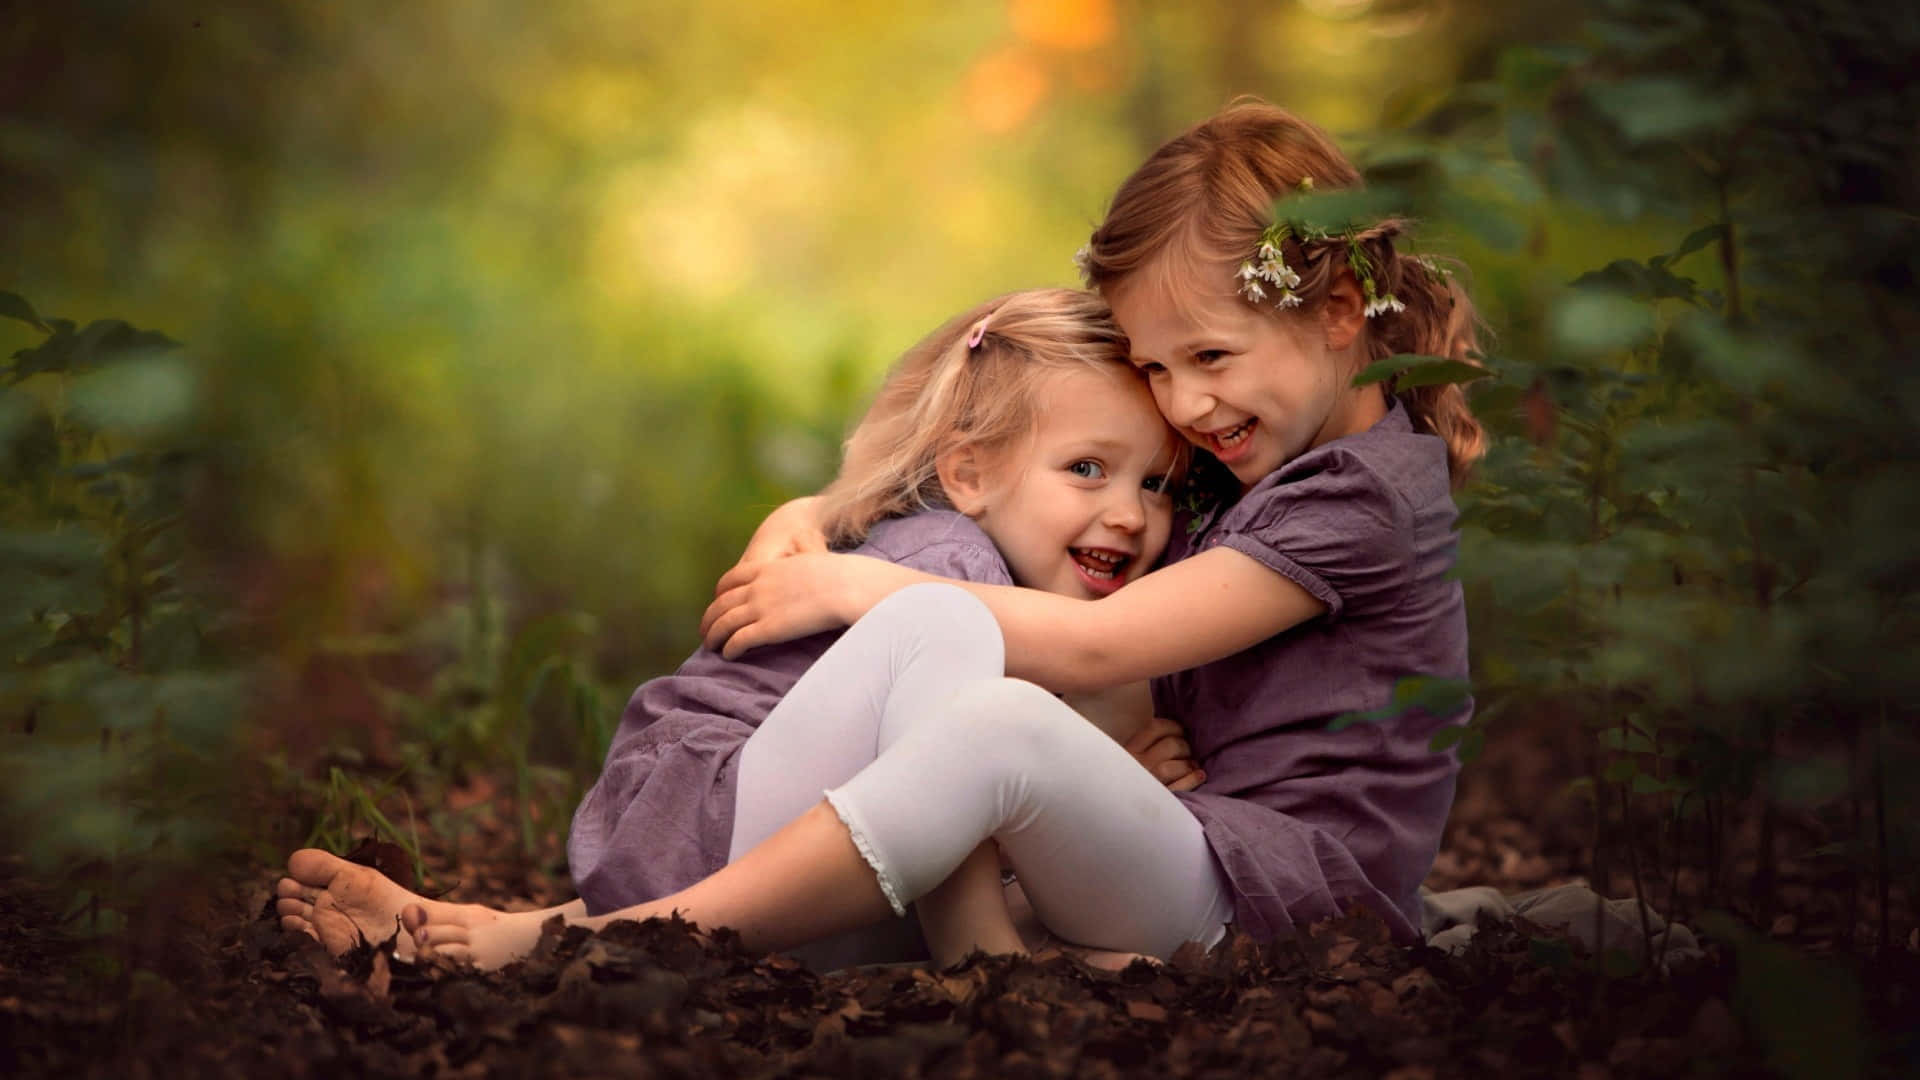 Adorable Kids Smiling Outdoors Wallpaper